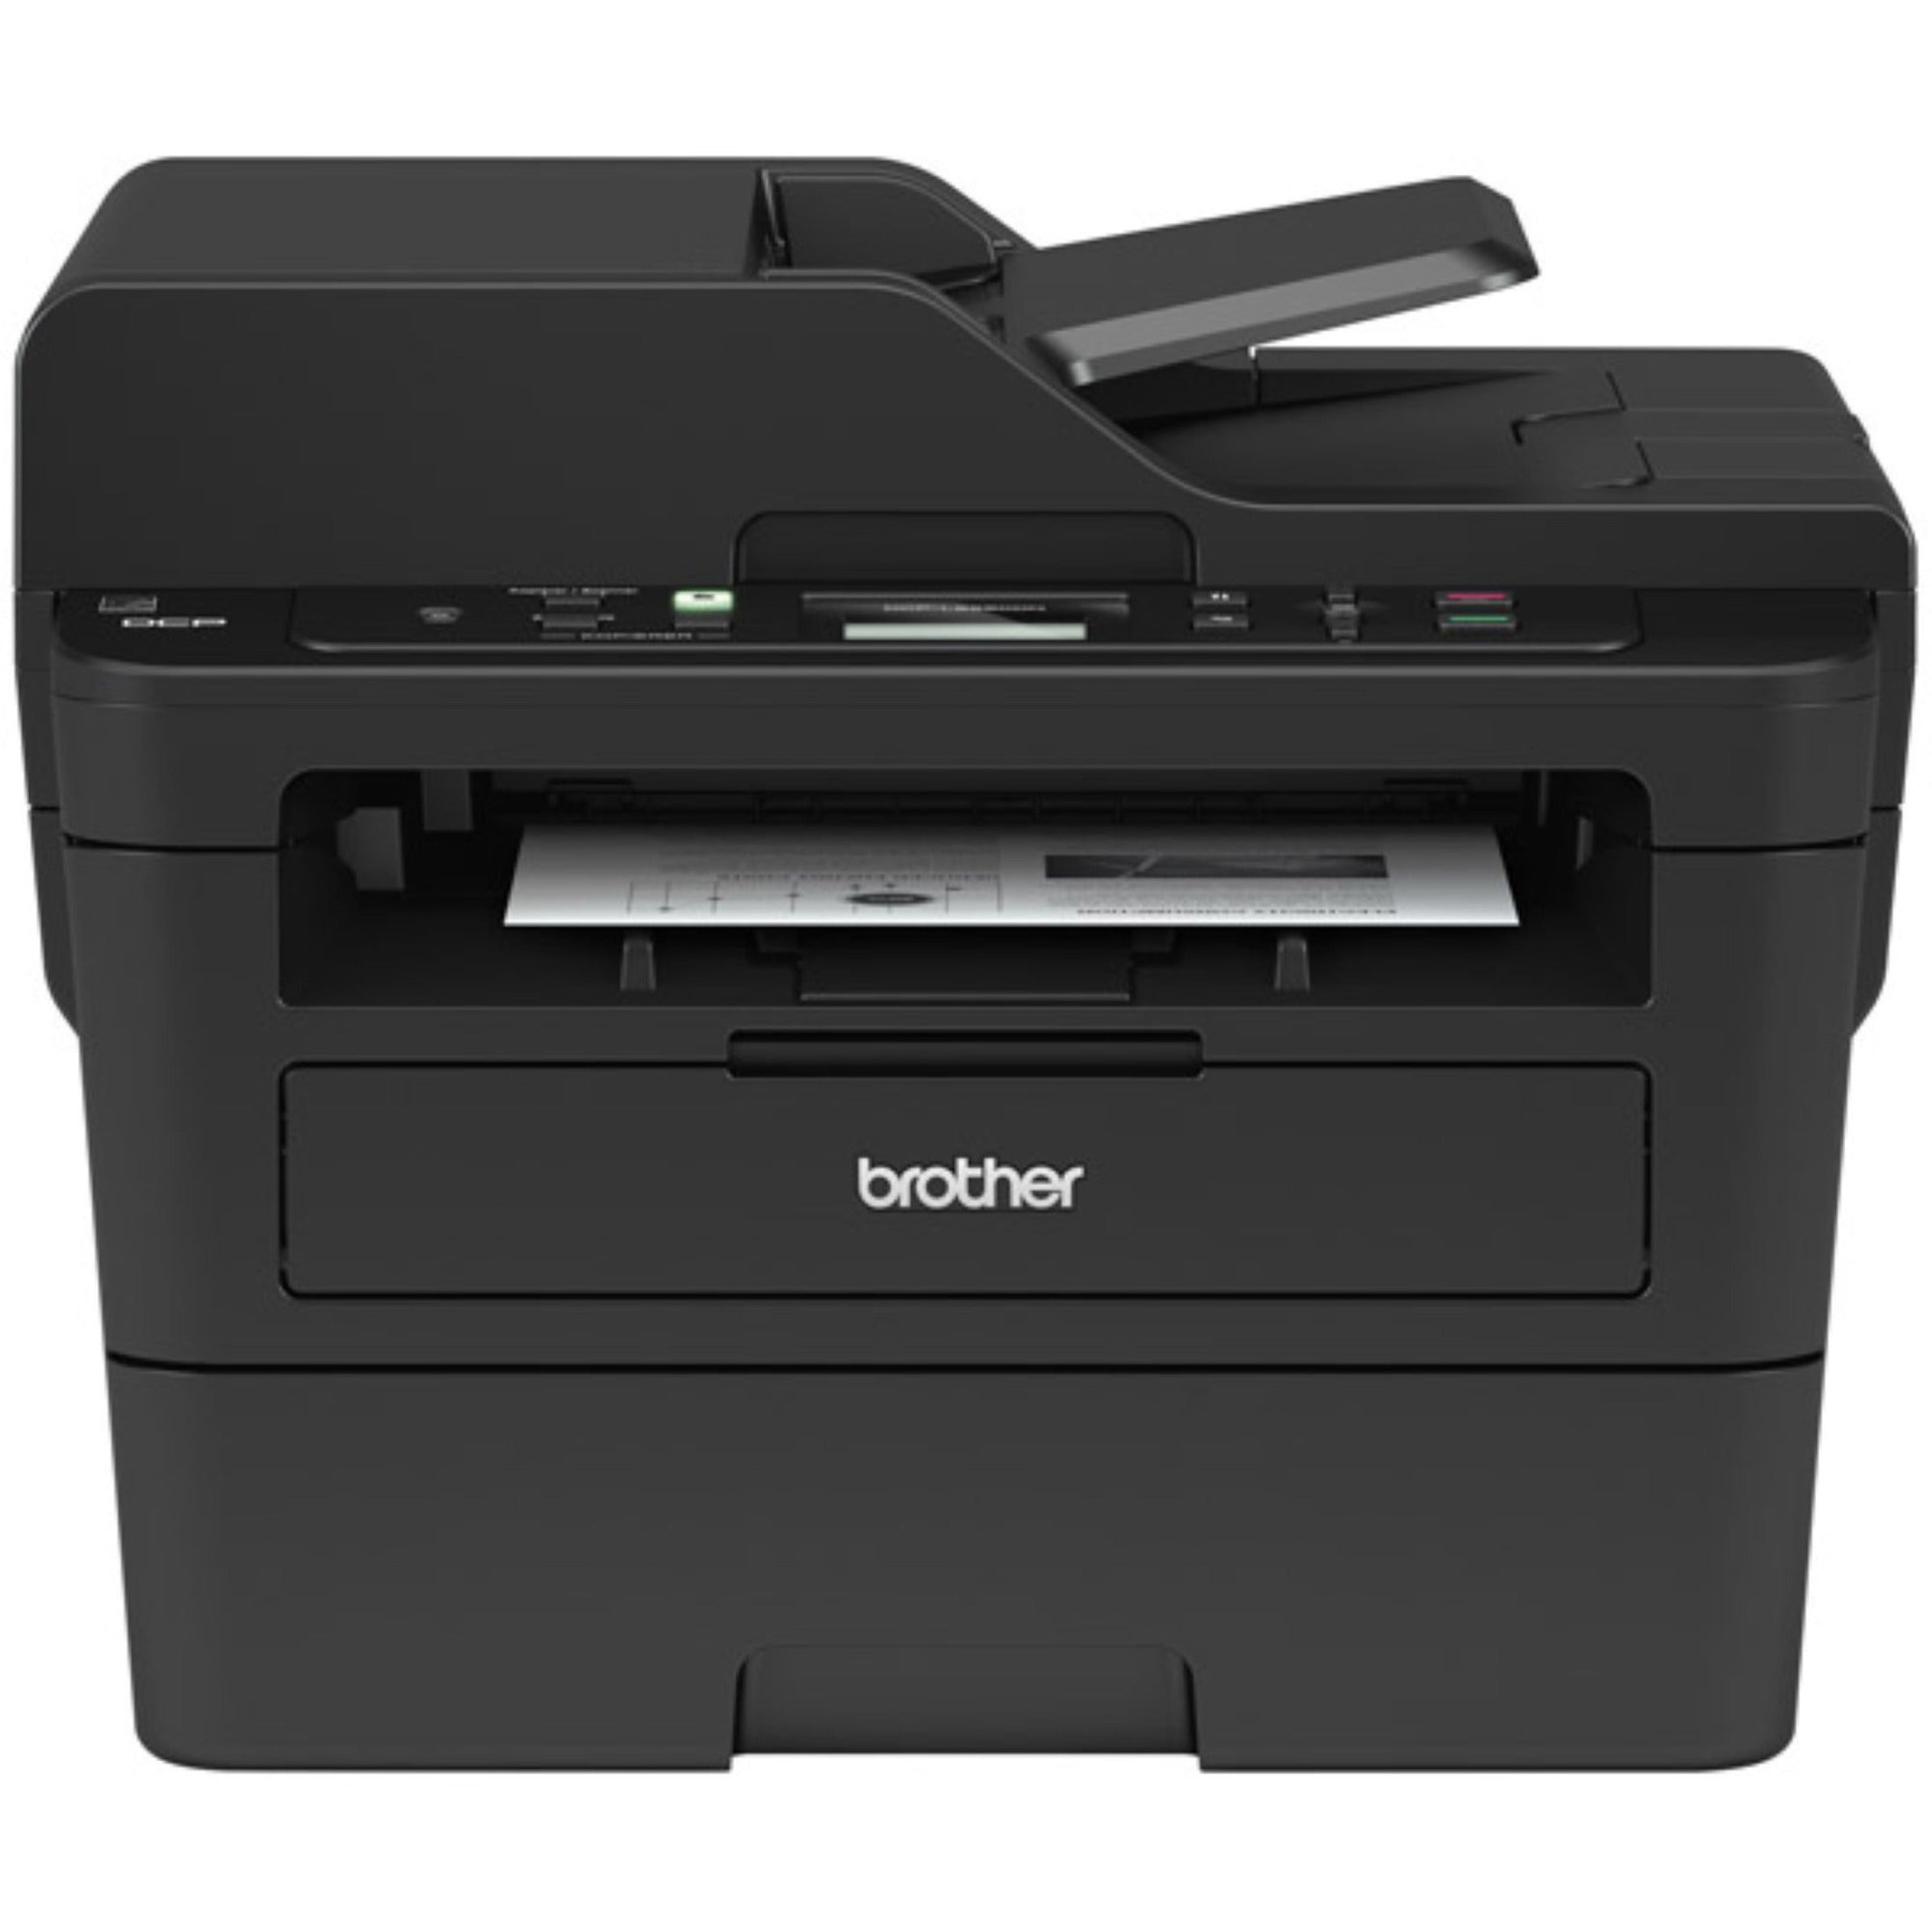 Brother DCP-L2550DW Multifunction Monochrome Laser Printer, 36 ppm, Wireless Printing, Automatic Duplex, LCD Display